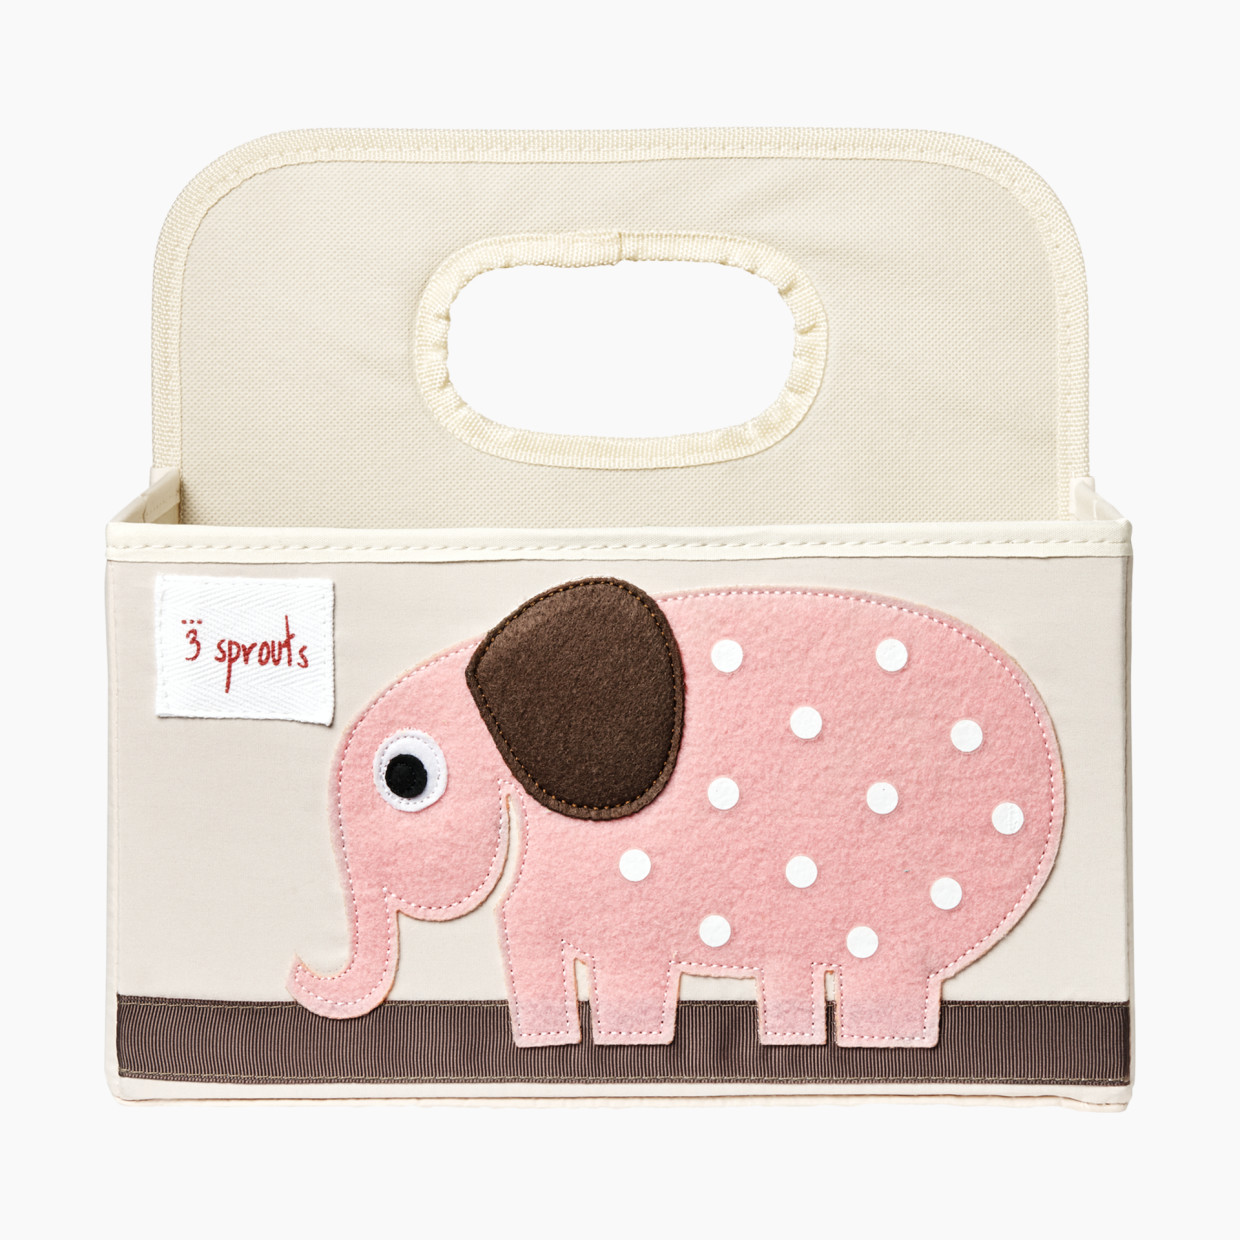 3 Sprouts Diaper Caddy - Pink Elephant.